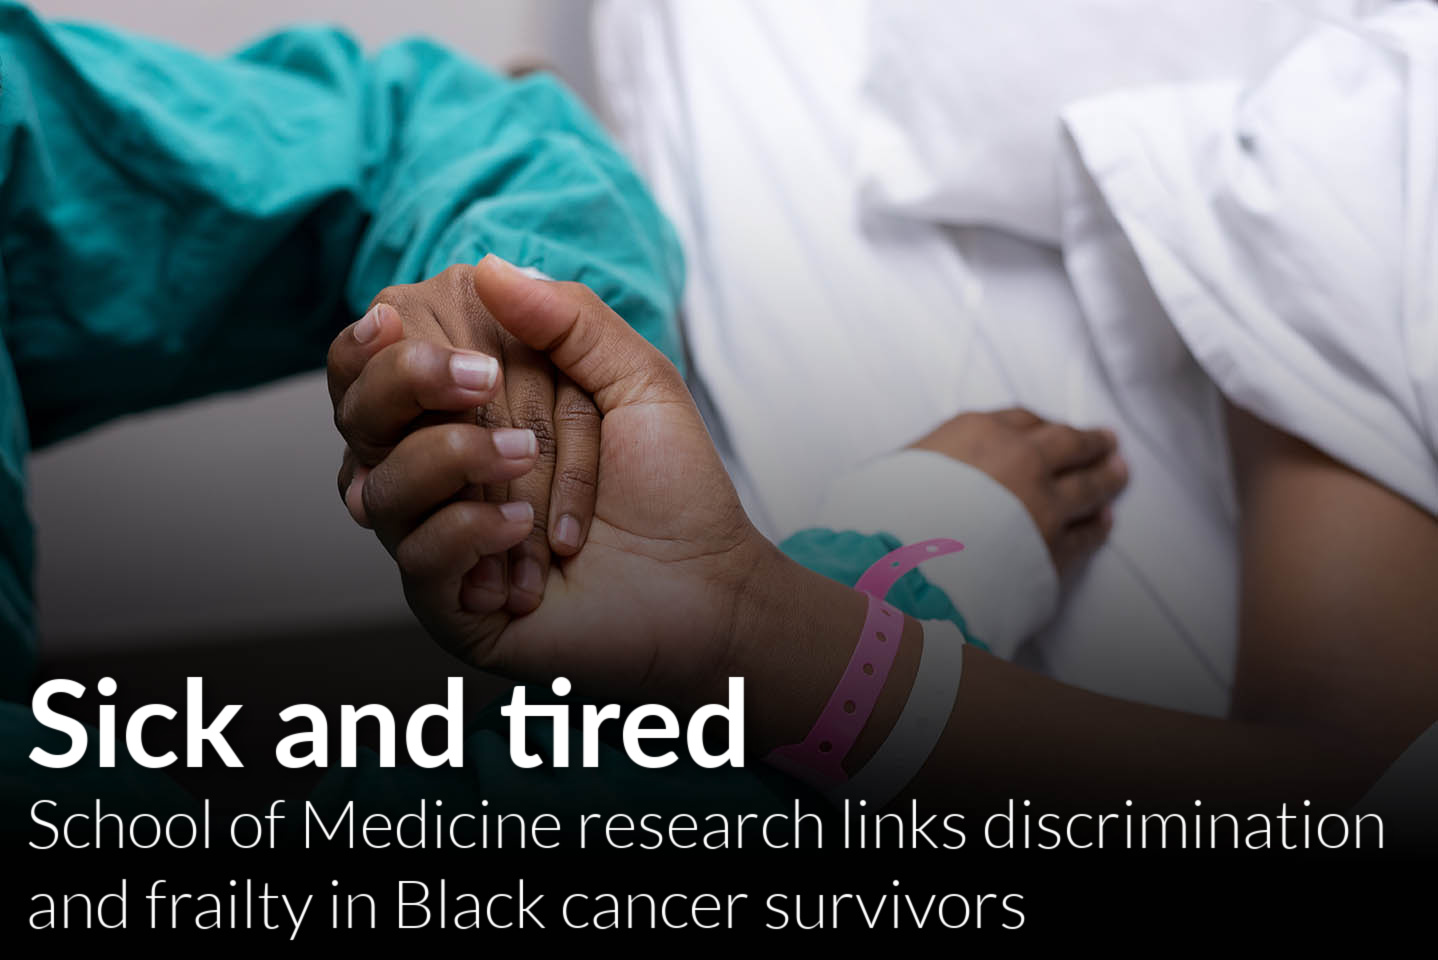 Research finds link between discrimination and frailty in Black cancer survivors